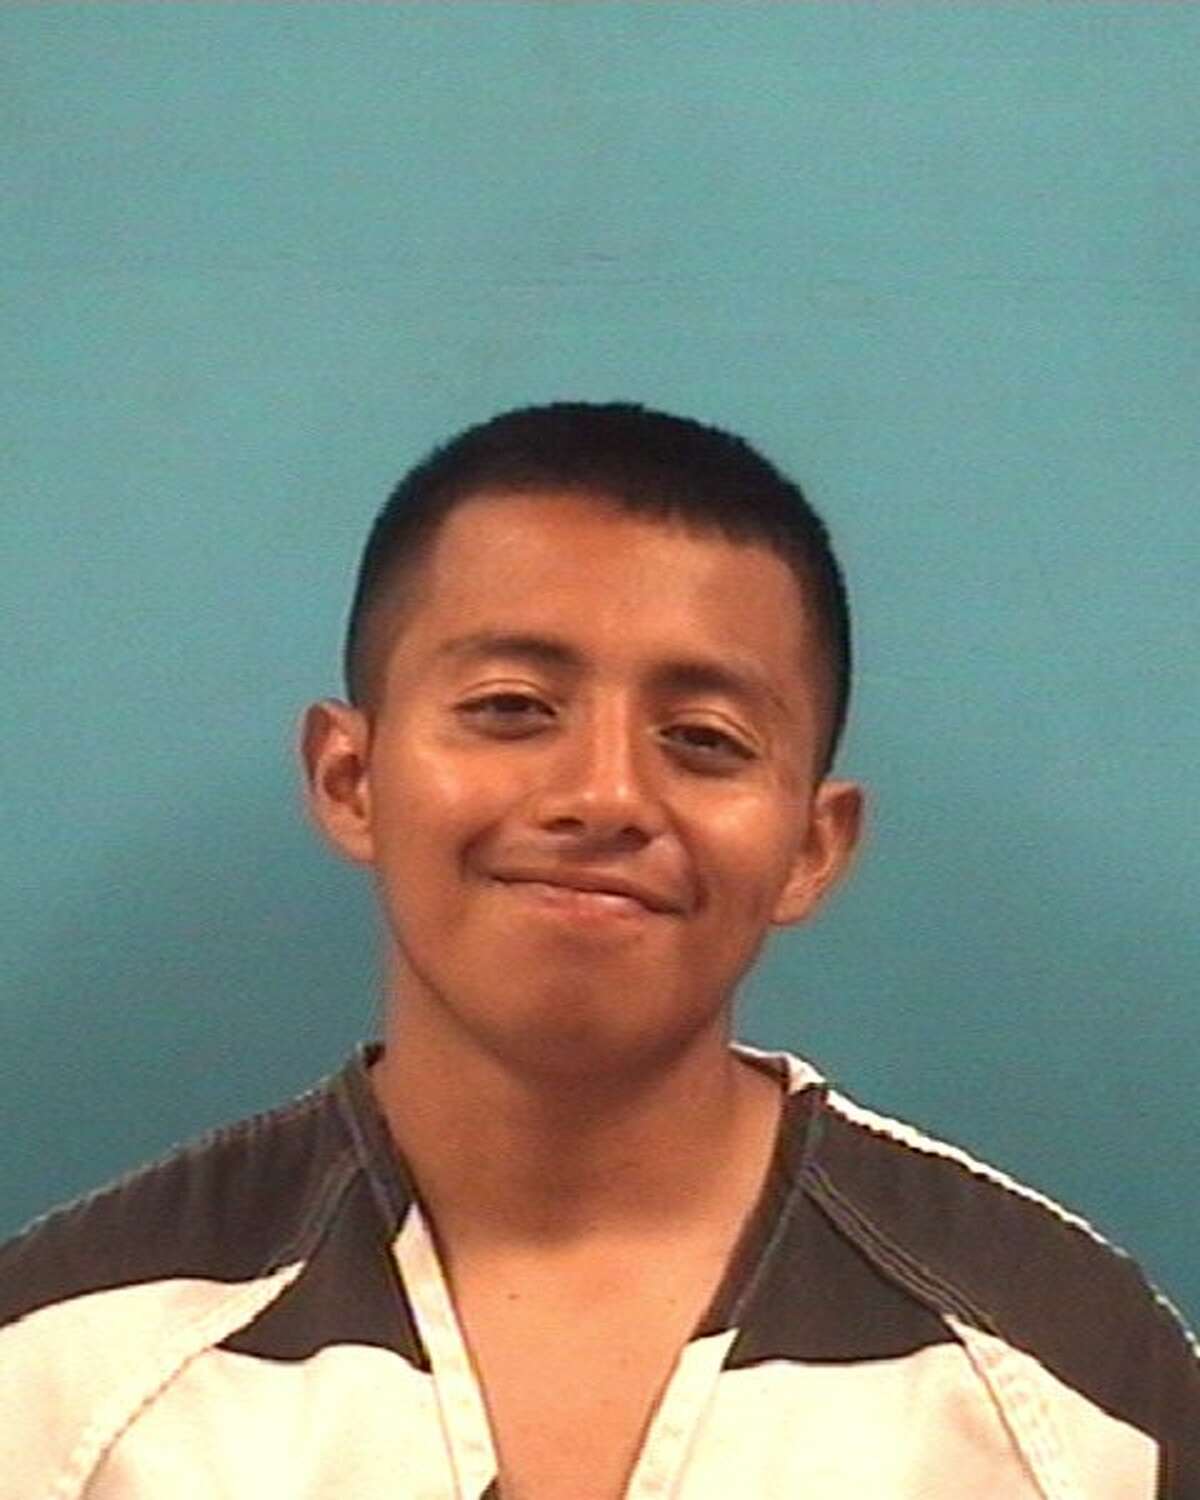 A suspect has been charged in the disappearance and murder of Joshua Wilkerson. Hermilo Vildo Moralez, 19 yoa, of Pearland has been charged with Murder, a First Degree Felony. In addition to the Murder charge, Moralez is charged with Failure to Identify, a Class C Misdemeanor and Attempting to Take a Weapon from a Peace Officer, a State Jail Felony. Moralez was identified early in the investigation as a person of interest when he was observed loitering in the area of Josh Wilkerson?s abandoned vehicle. When questioned, Moralez provided false information relating to his identity. When his true identity was discovered, he was taken into custody and charged with Failure to Identify. His bond on that charge is $2,000. As the investigation progressed, Moralez agreed to cooperate with search and rescue activities on the ground. Moralez was handcuffed and walking with detectives through a field Wednesday afternoon when the group reached a fence. As investigators negotiated over the fence, Moralez attempted to pull a detective?s weapon from his holster. Moralez was immediately restrained and returned to the city jail. As a result, Moralez was charged with Attempting to Take a Weapon from a Peace Officer. His bond on that charge is $30,000 A motive for the killing has not been identified and no details regarding Joshua Wilkerson?s remains are being released. No bond has been set for the Murder charge.